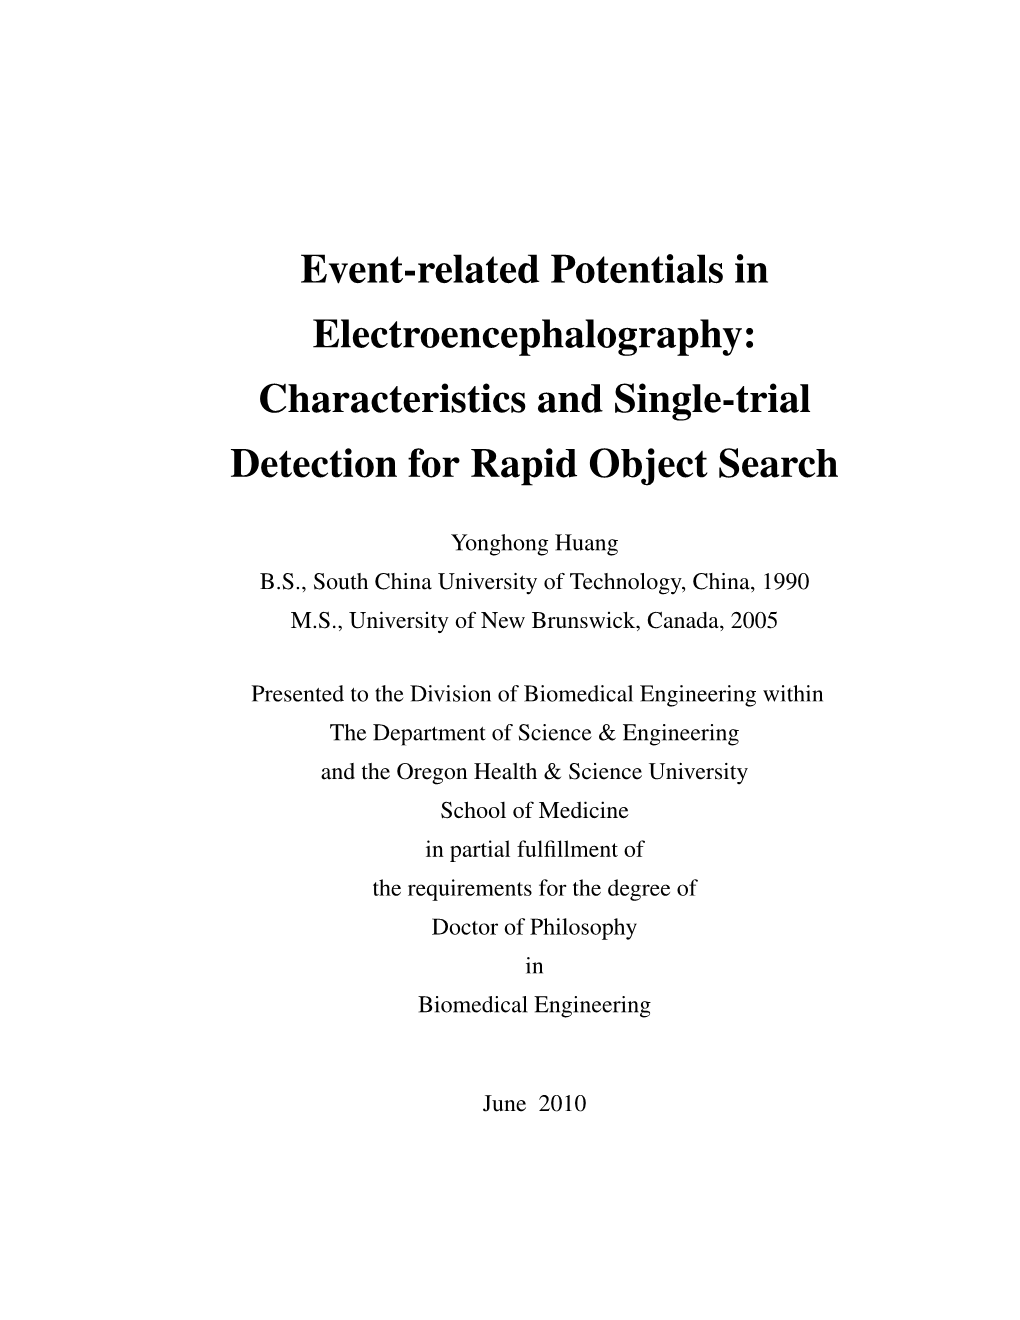 Event-Related Potentials in Electroencephalography: Characteristics and Single-Trial Detection for Rapid Object Search